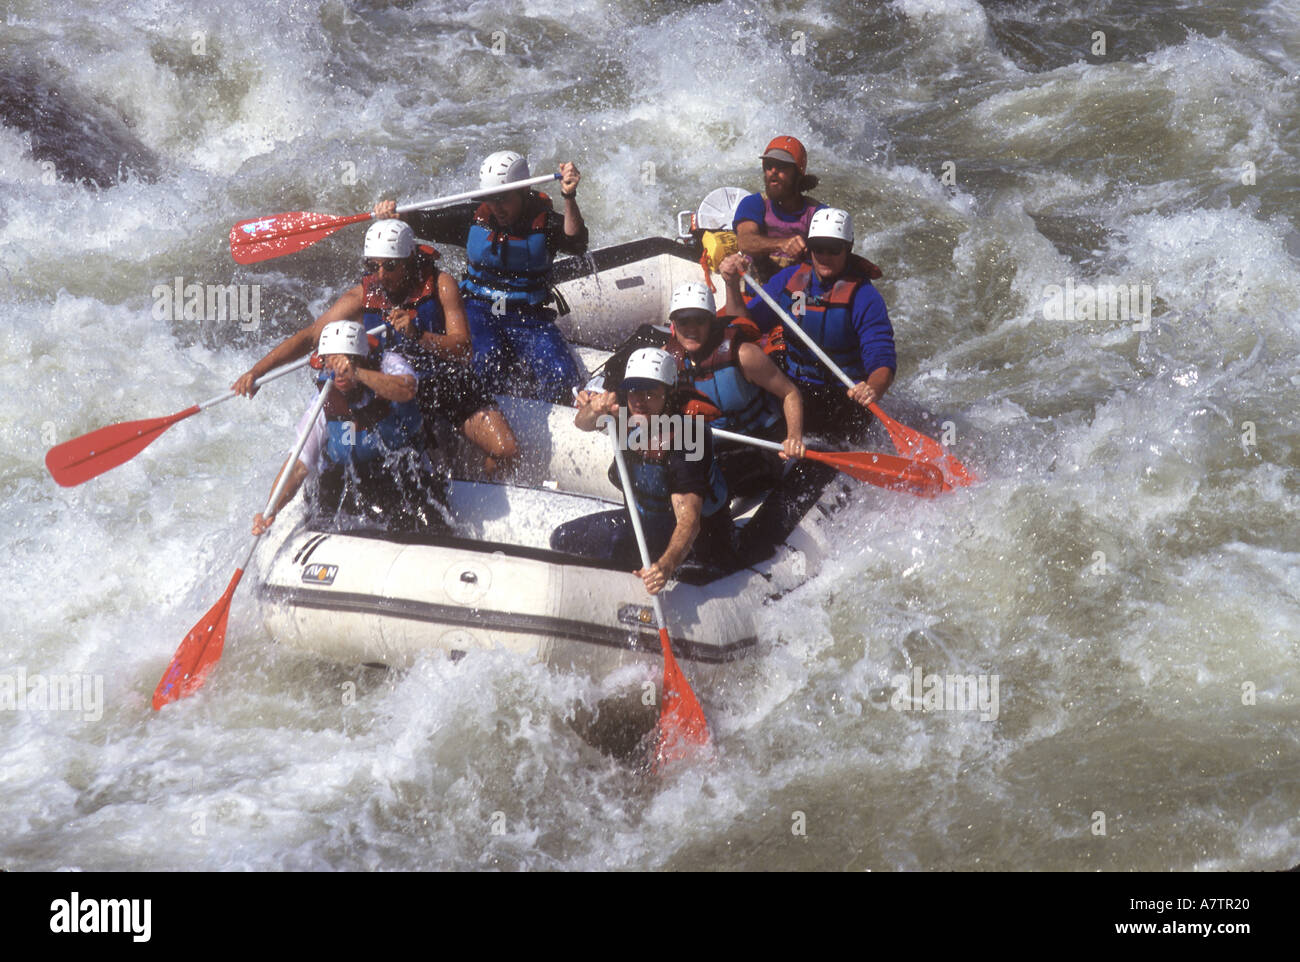 USA, Fayetteville, West Virginia, Whitewater rafting on the Gauley River Stock Photo